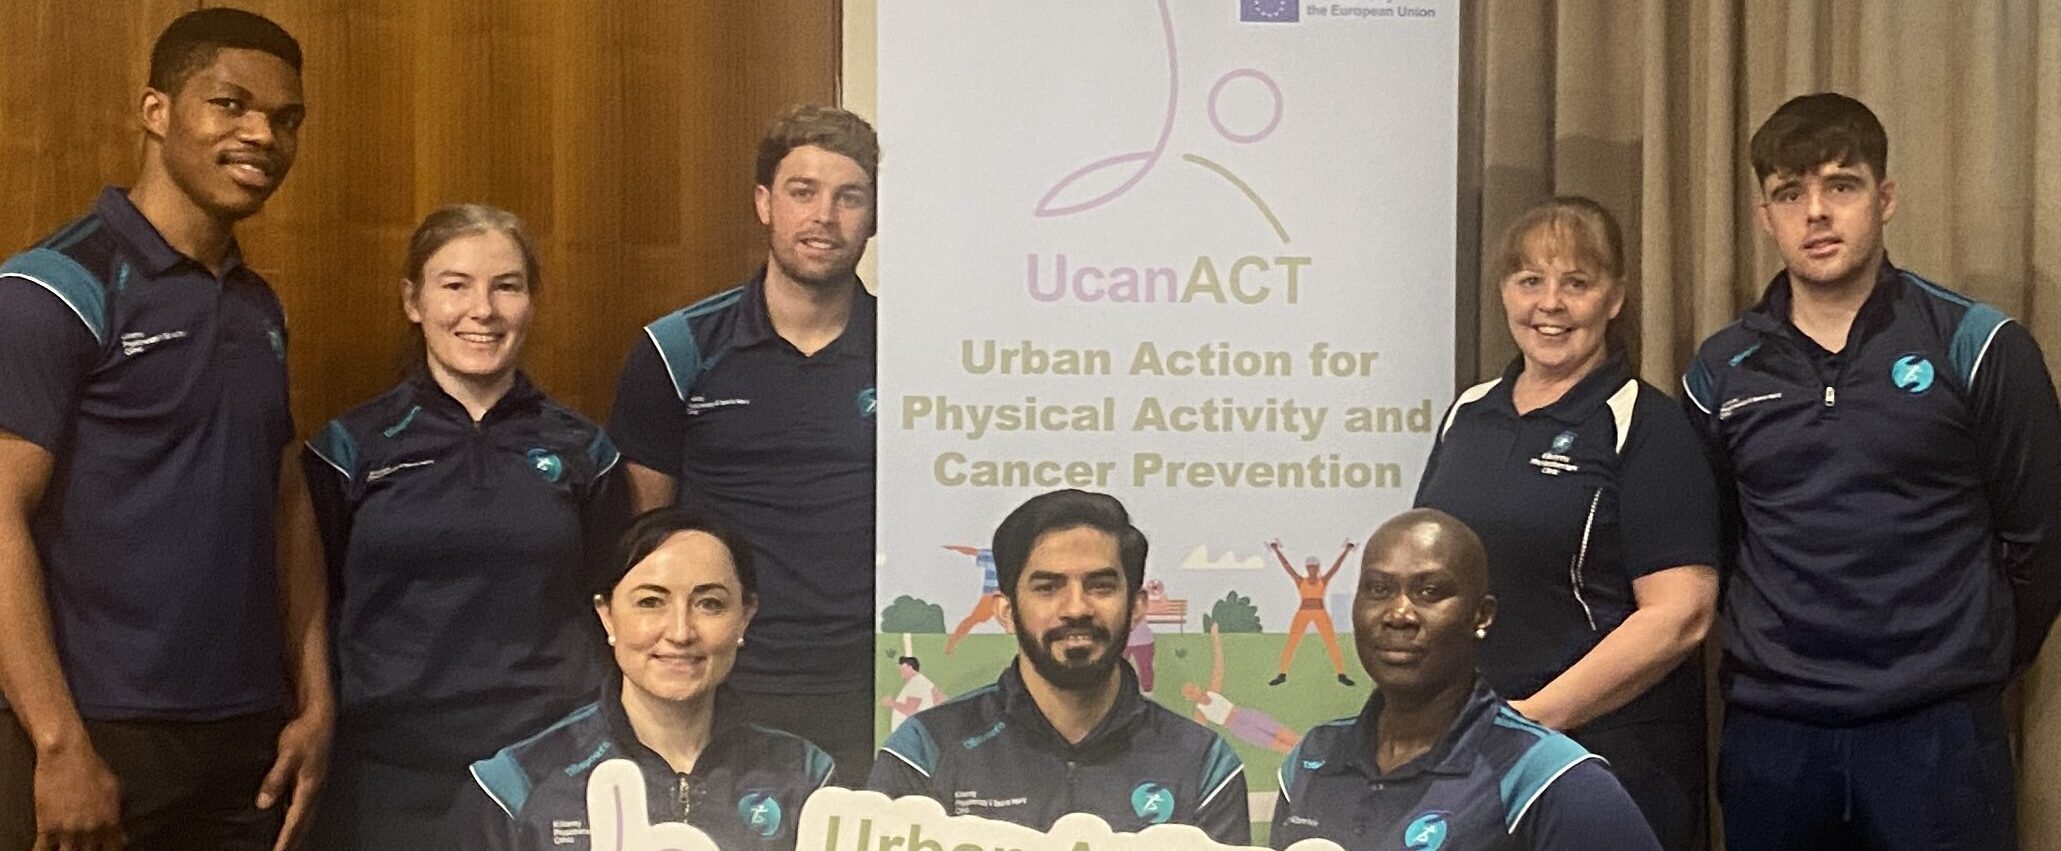 Kilkenny Physiotherapy Staff attending training for UcanACT programme